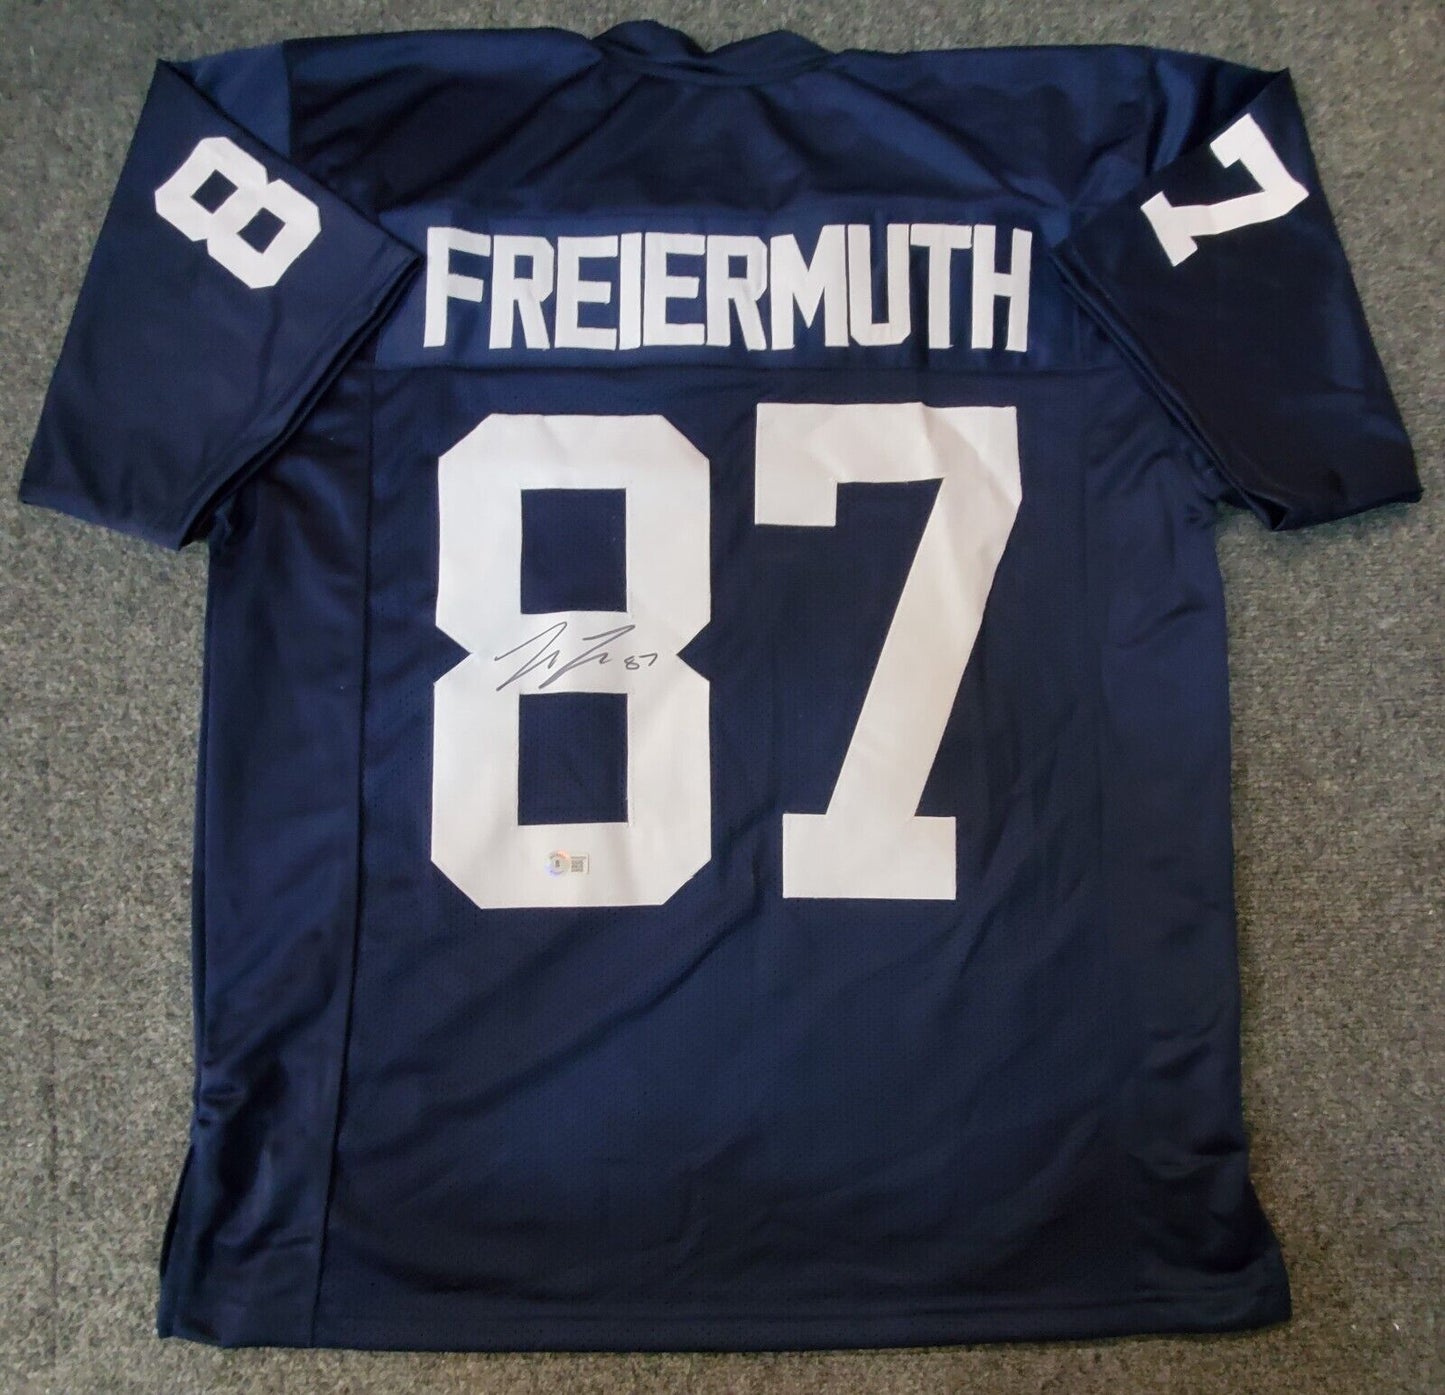 MVP Authentics Penn State Nittany Lions Pat Freiermuth Autographed Signed Jerseybeckett Holo 135 sports jersey framing , jersey framing